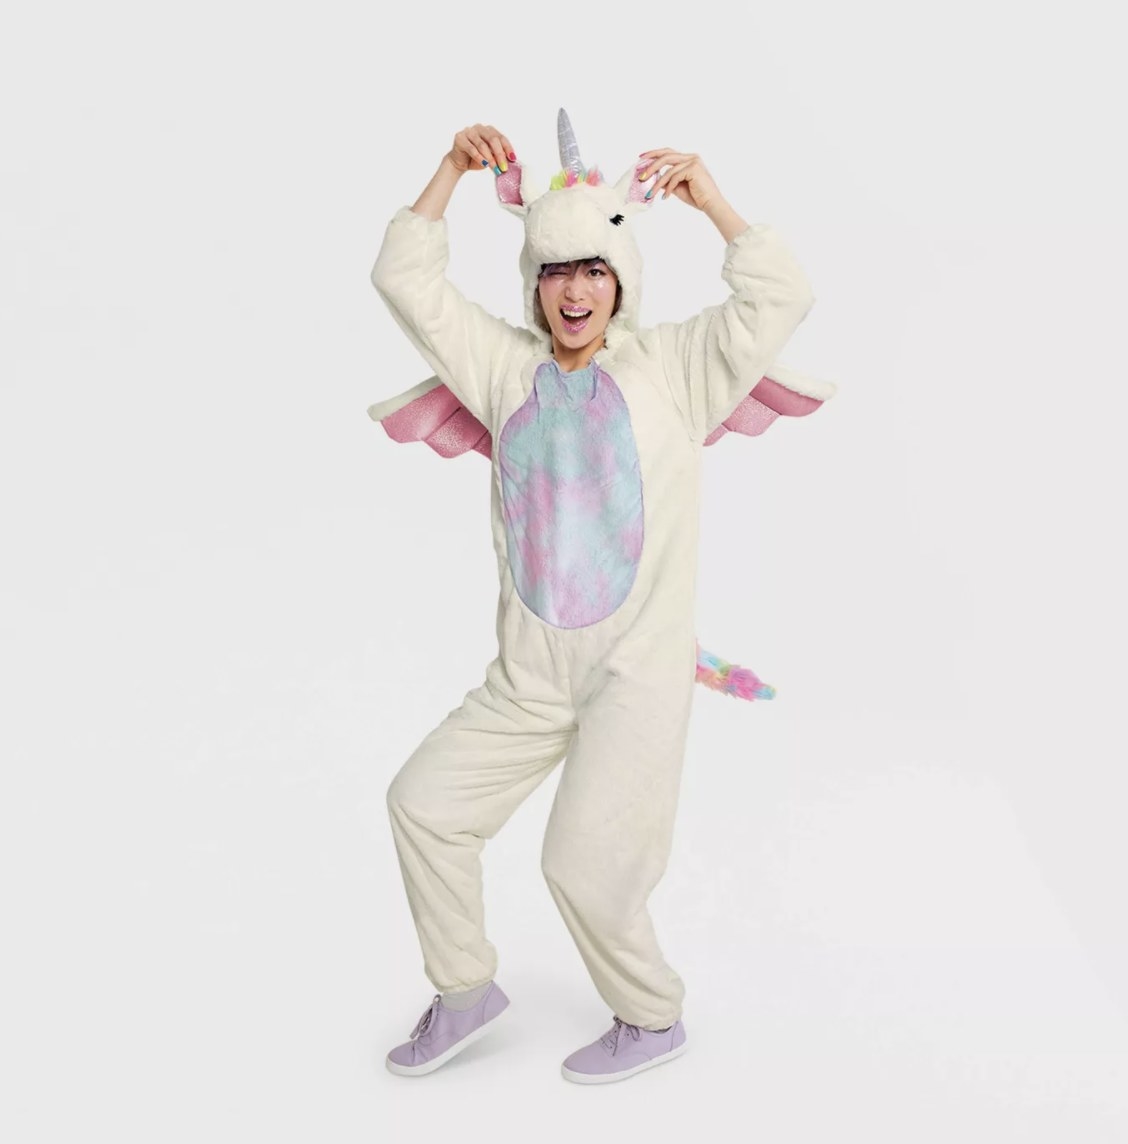 An adult is posing excitedly while wearing the soft plush white costume with silver, purple pink and blue shiny and cloudy accents